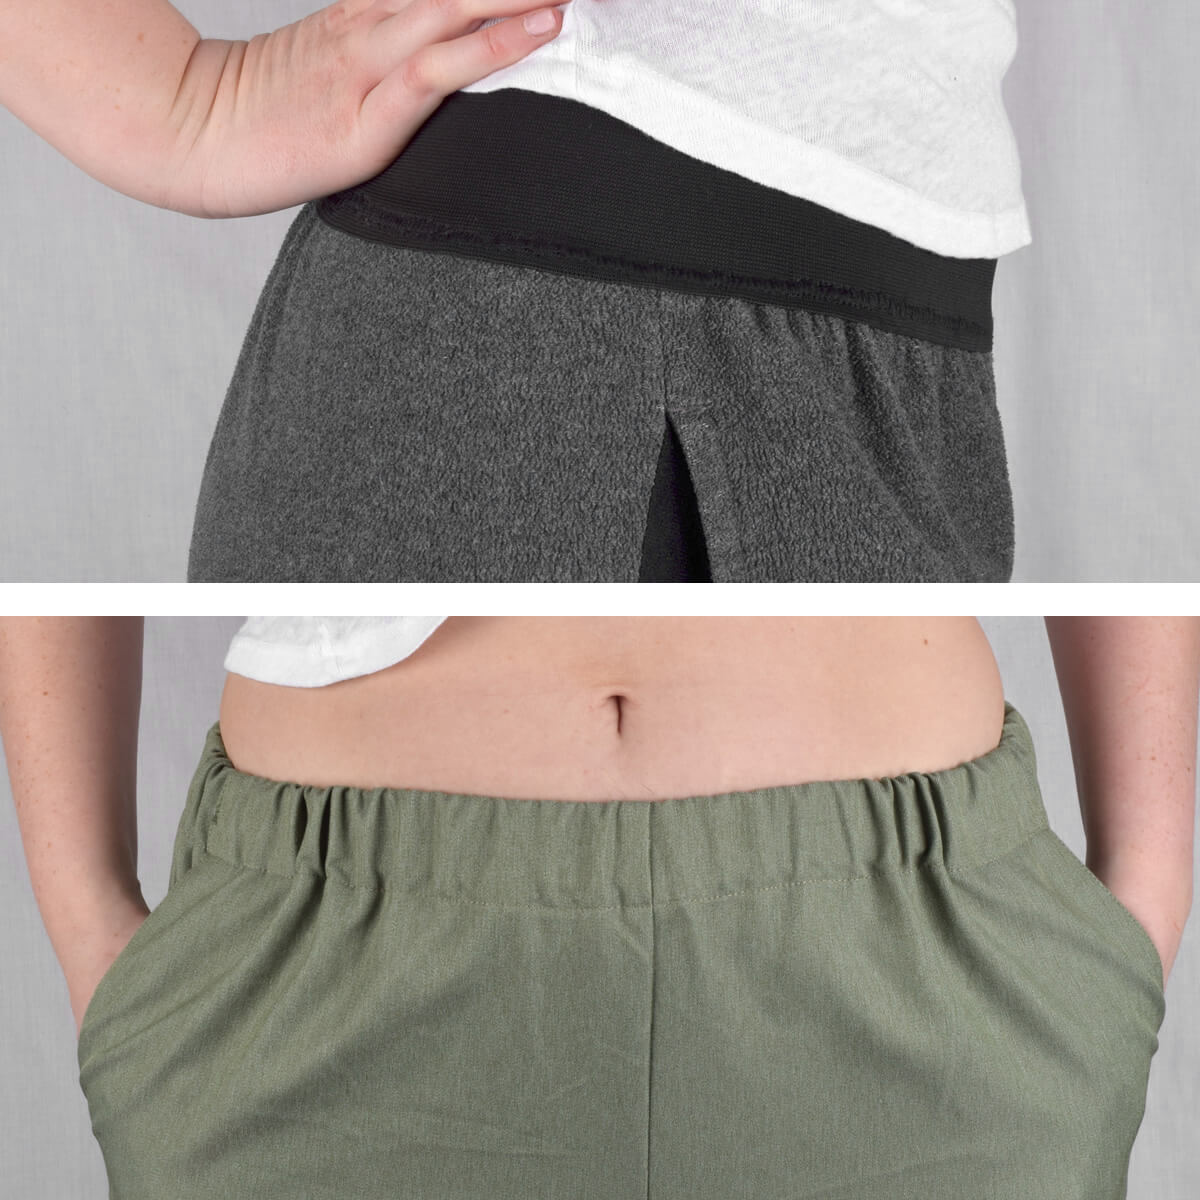 how to sew a seamless elastic waist band in pants - Yahoo Image